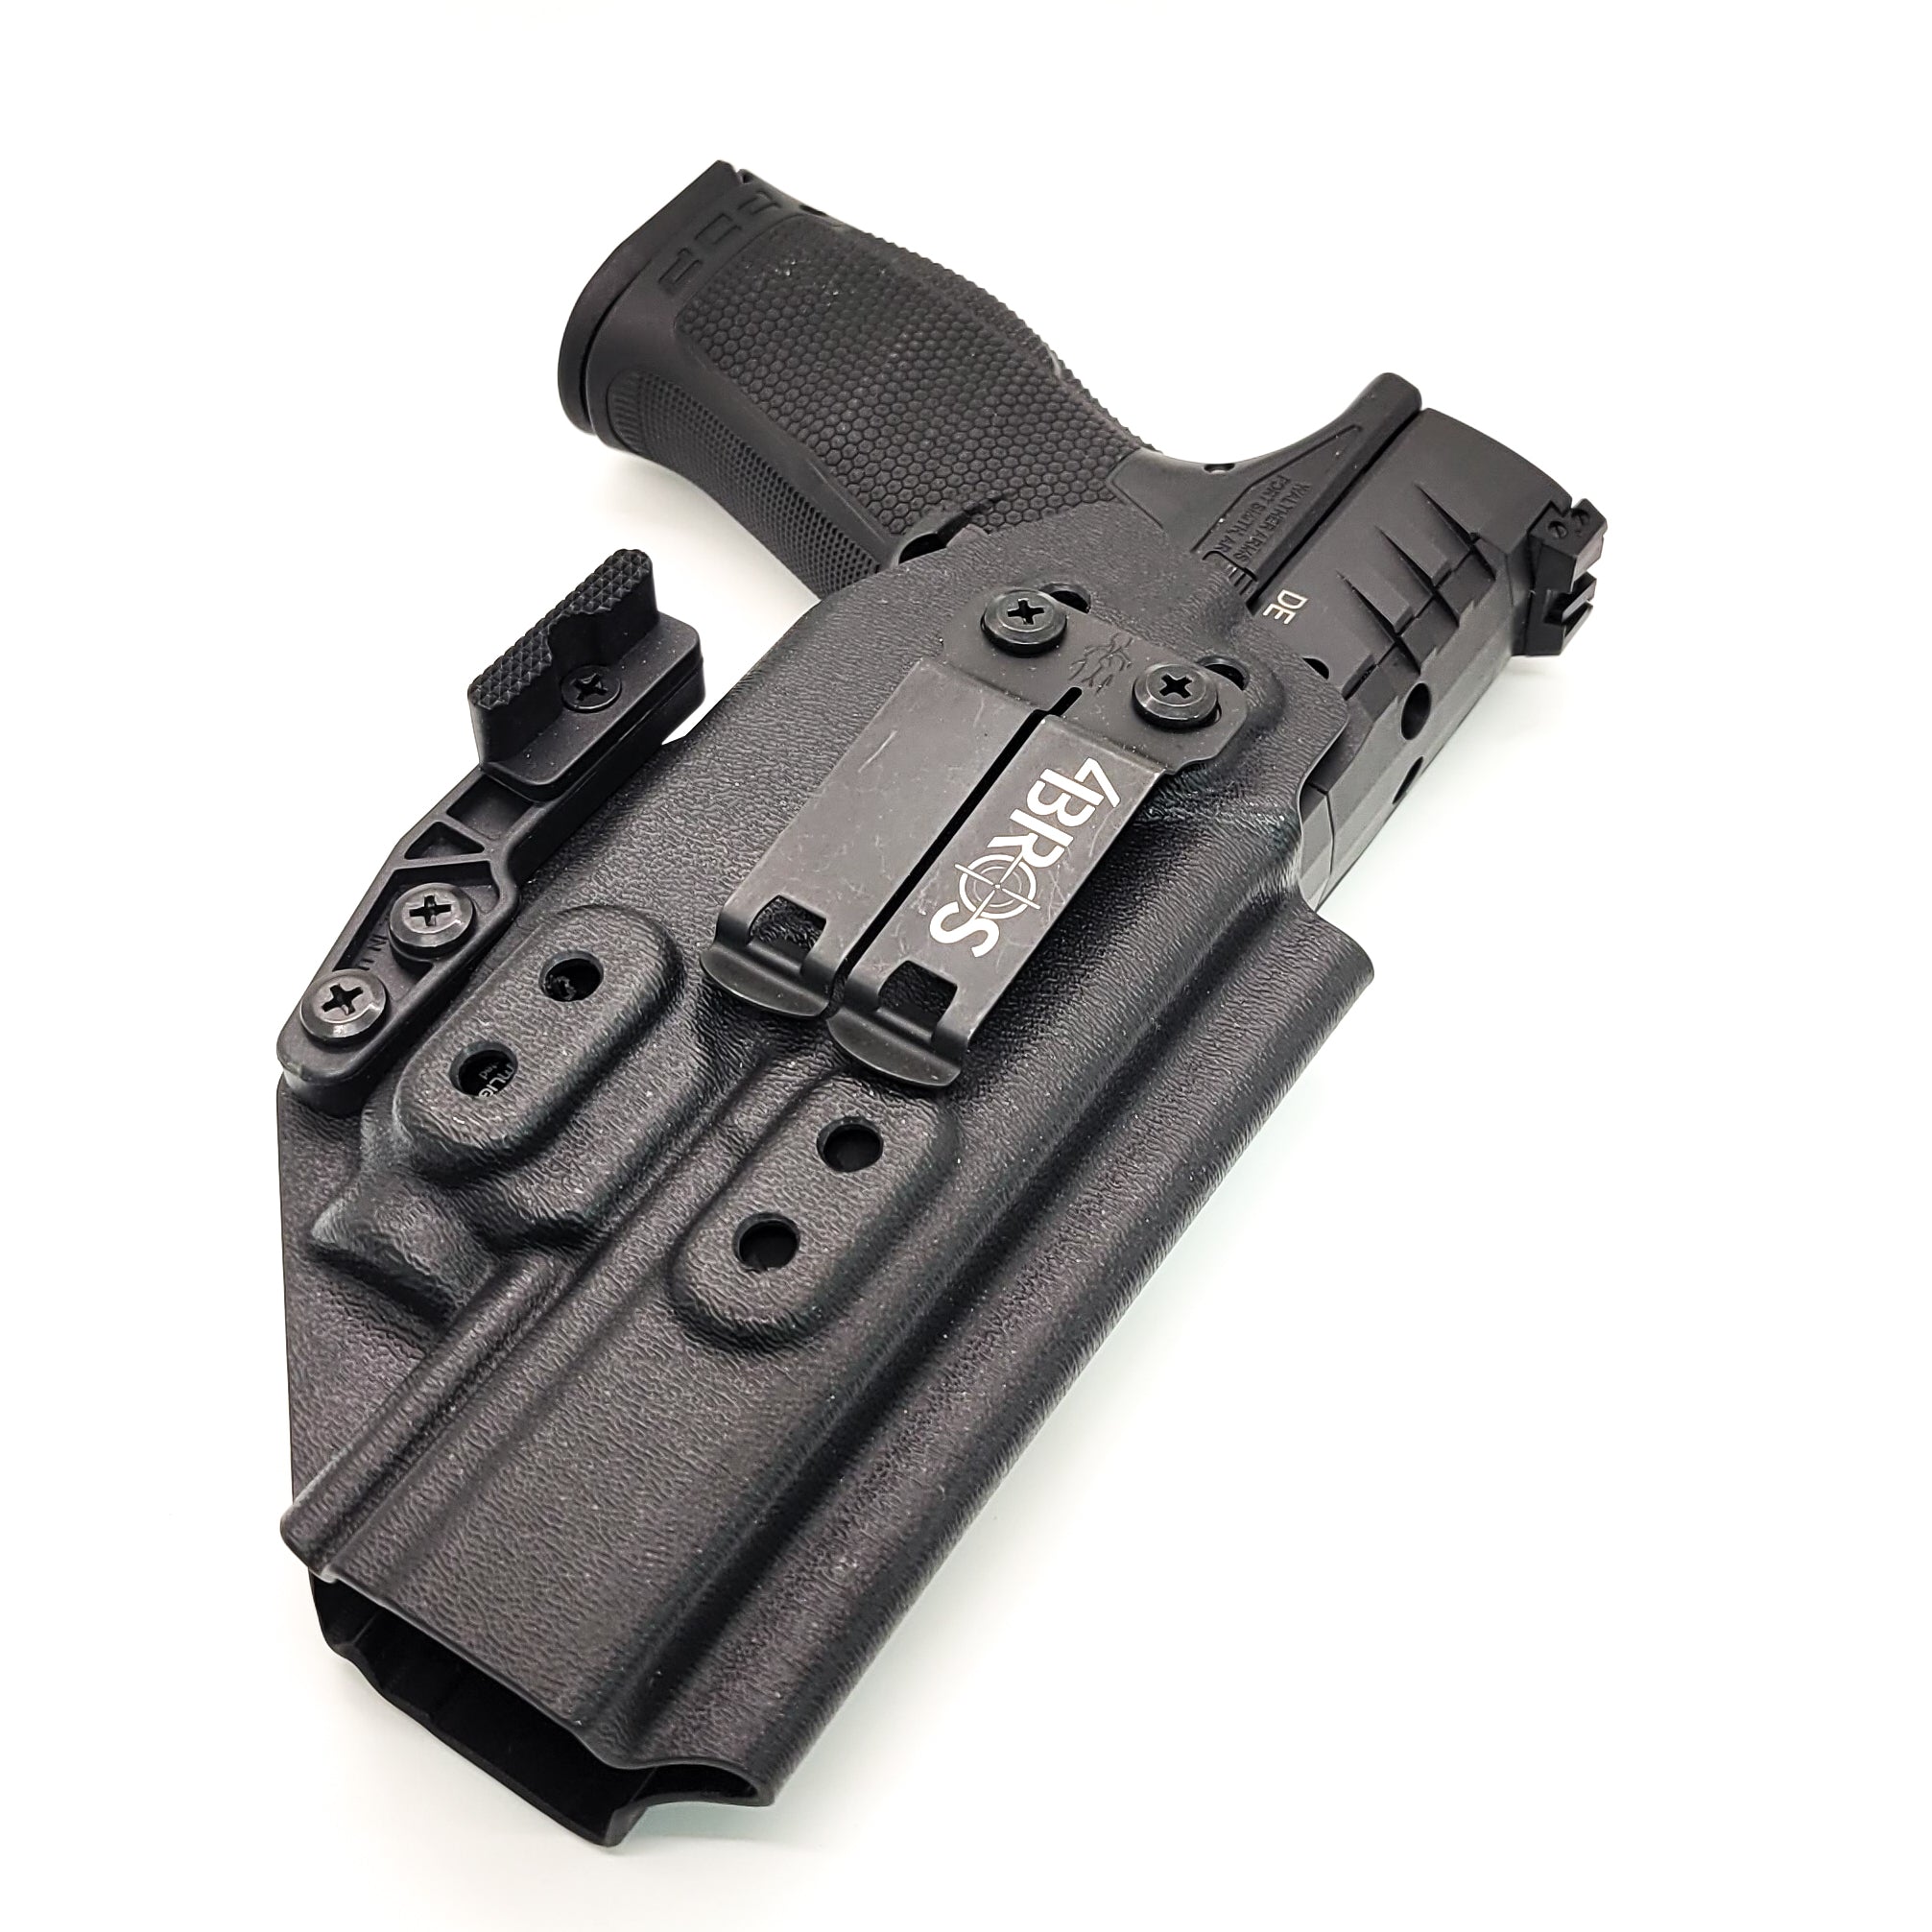 For the best concealed carry Inside Waistband IWB AIWB Holster designed to fit the Walther PDP 5" Full-Size & Compact pistol with Streamlight TLR-7A or TLR-7 on the firearm, shop Four Brothers Holsters. Cut for red dot sight, full sweat guard, adjustable retention & open muzzle for threaded barrels & compensators.